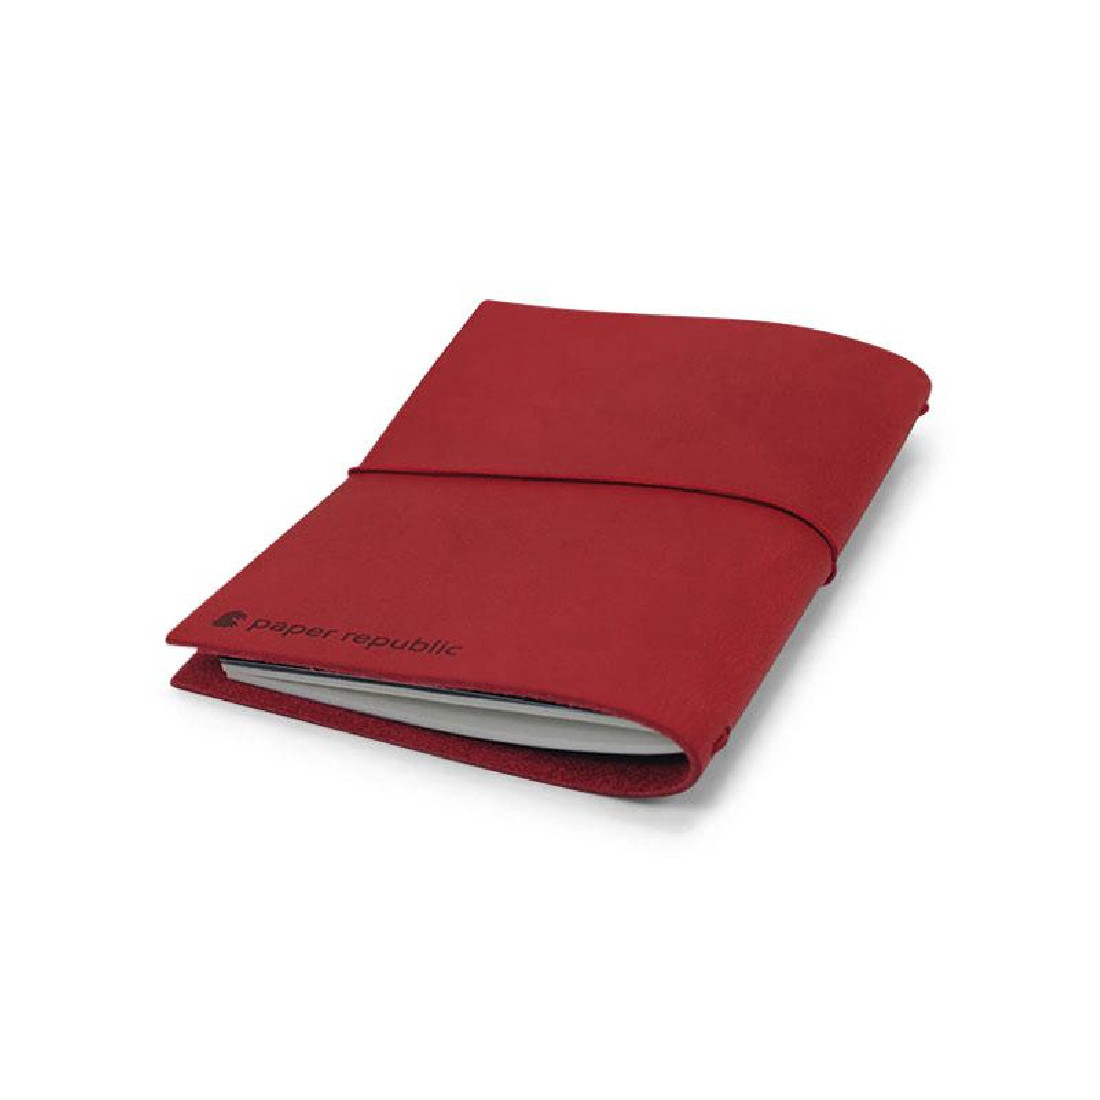 Paper Republic the writers essentials pocket red  leather journal kit